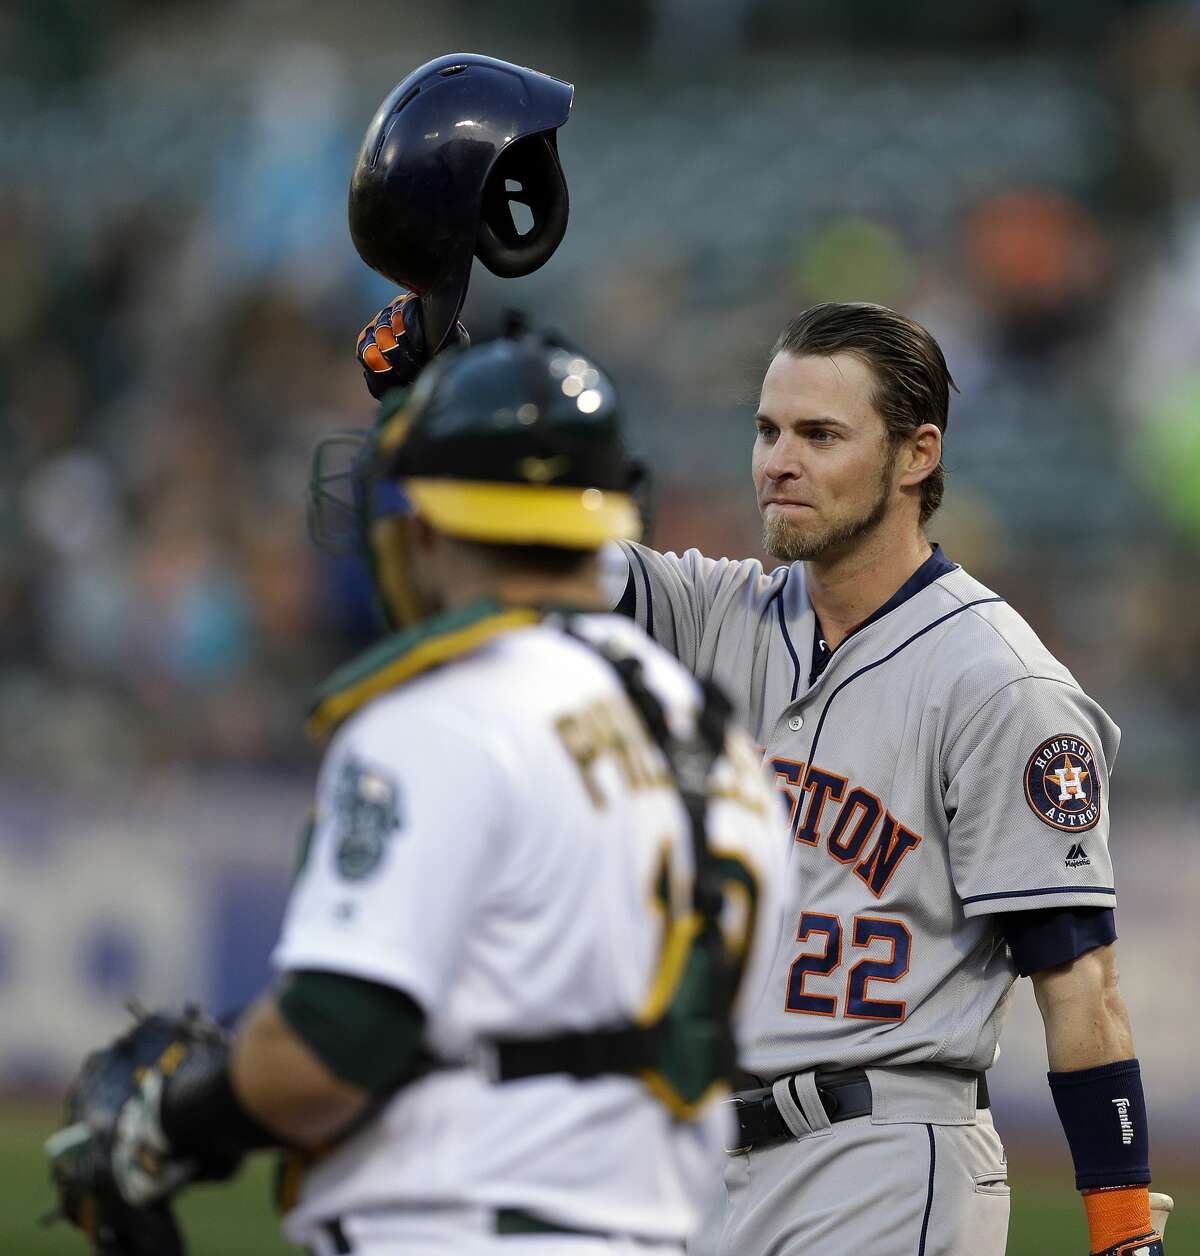 Houston Astros' Josh Reddick (22) tips his helmet to fans as he comes to bat against the Oakland Athletics in the first inning of a baseball game Friday, April 14, 2017, in Oakland, Calif. This is Reddick's first return to Oakland since July 2016, when he was a right fielder for the Athletics. (AP Photo/Ben Margot)